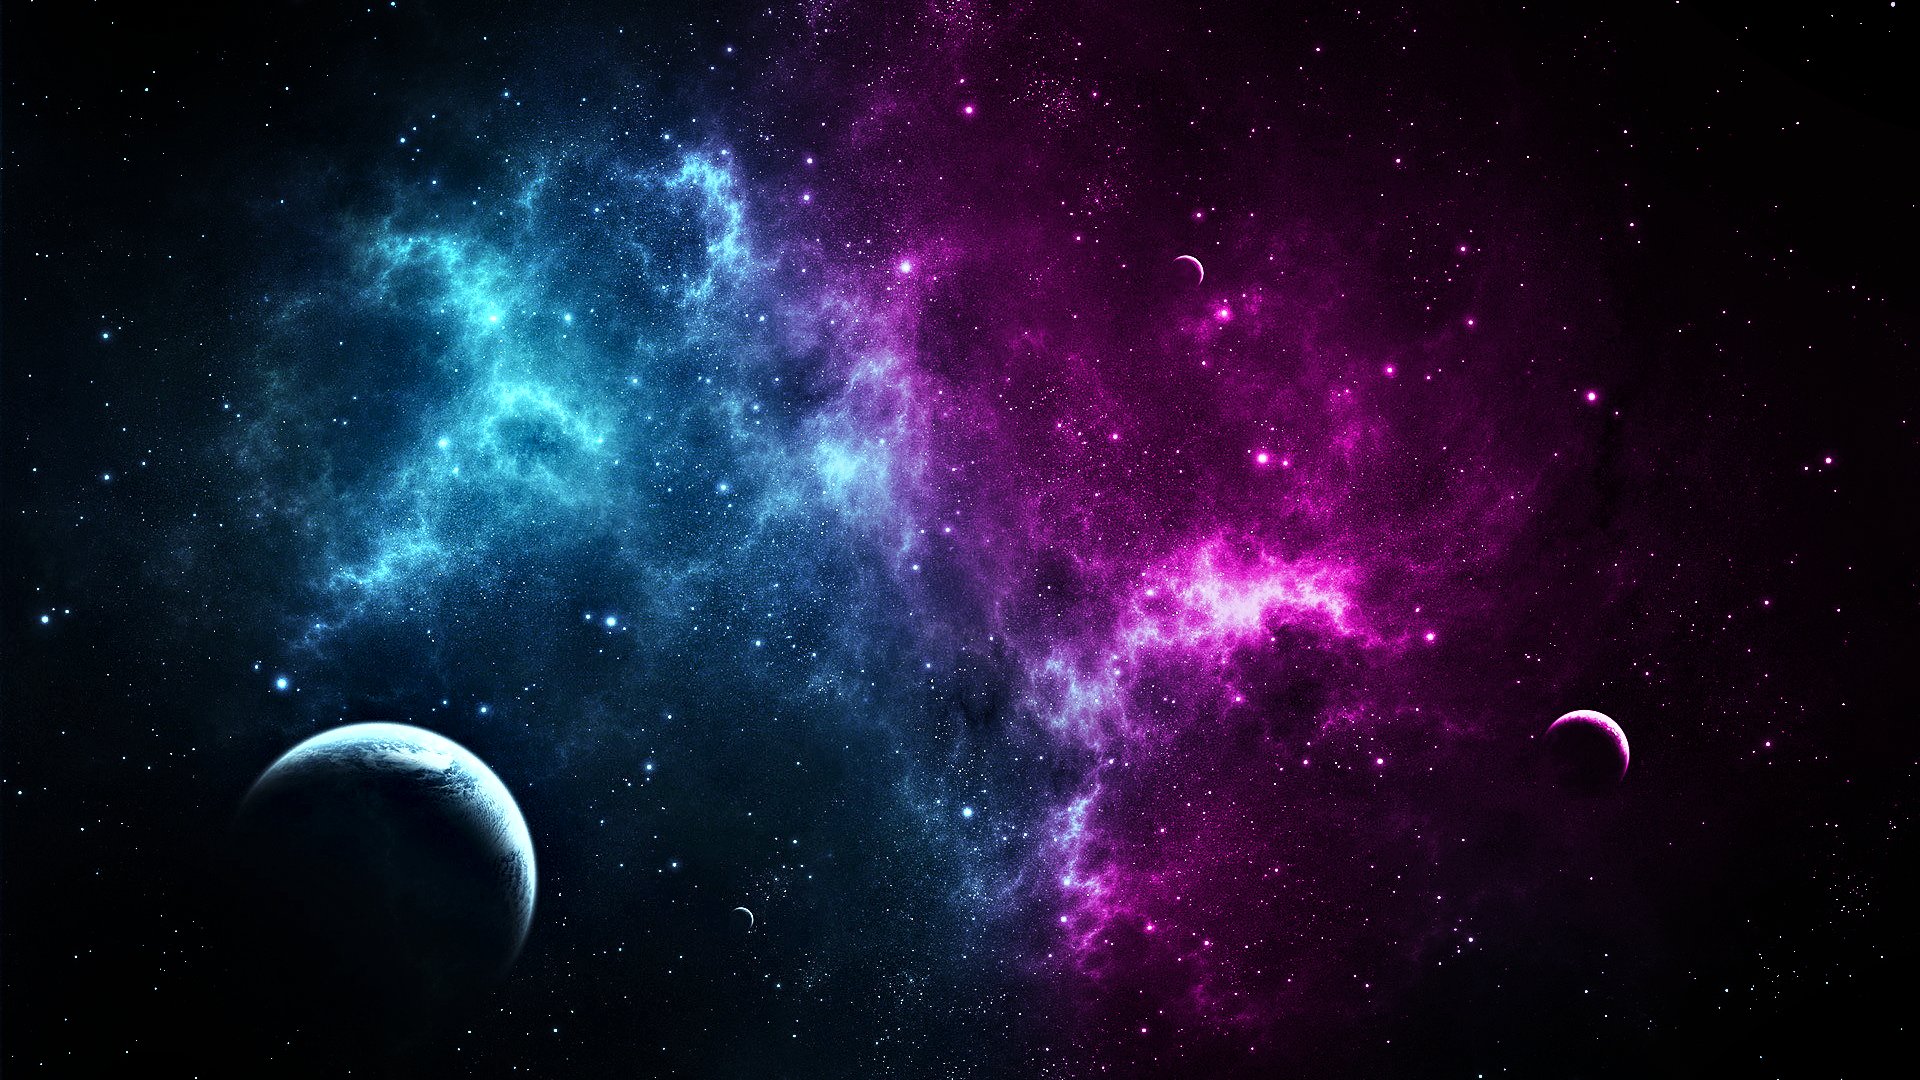 Space wallpaper - High Definition, High Resolution HD Wallpapers : High  Definition, High Resolution HD Wallpapers